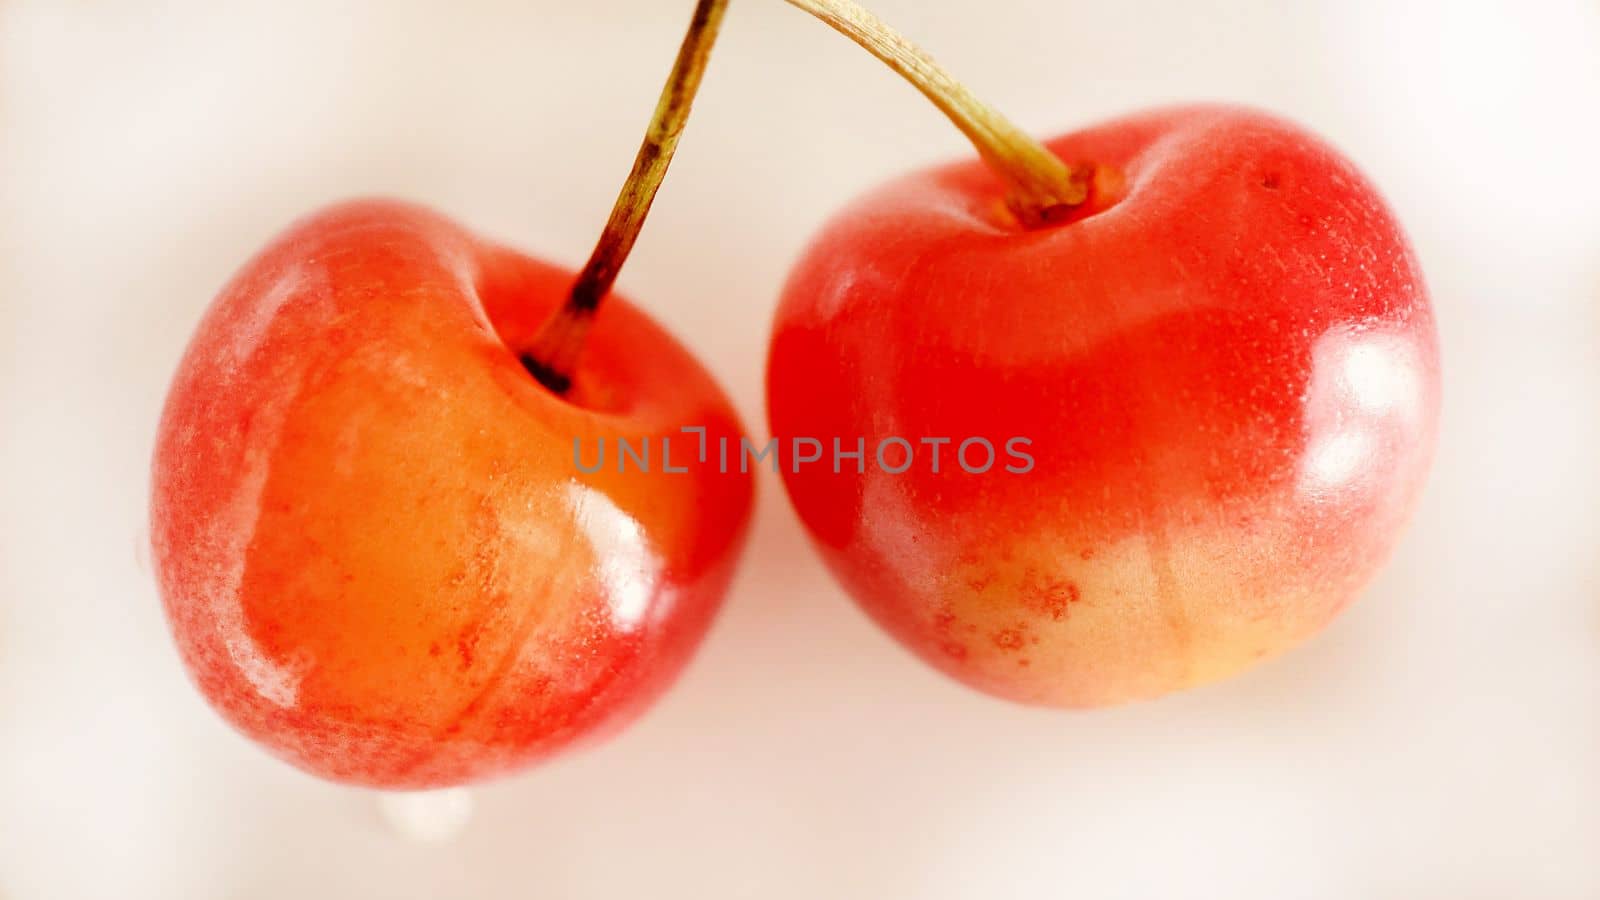 Two ripe red-yellow cherries on a light background by Mastak80